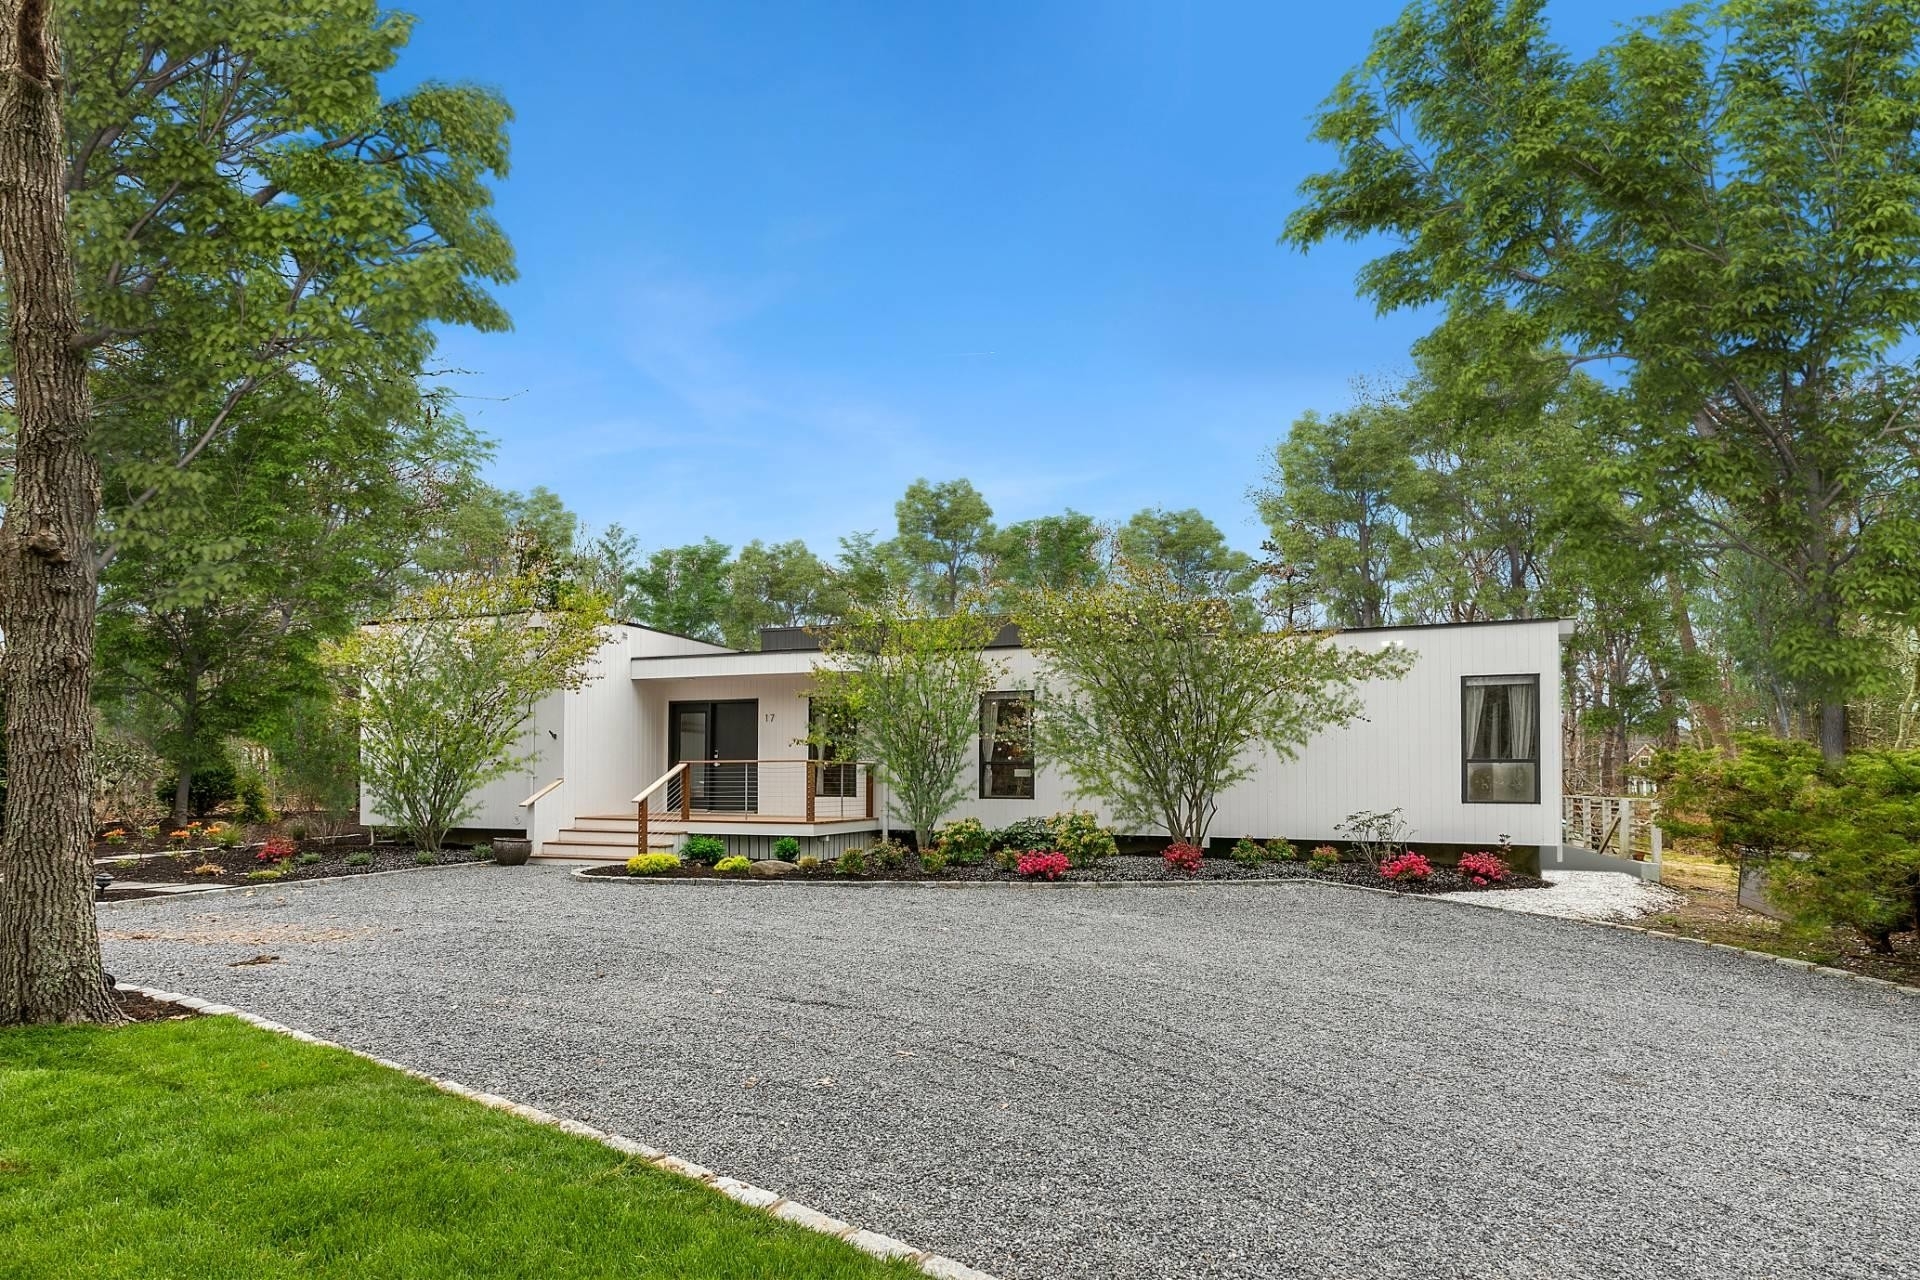 Single Family Home for Sale at Quogue Village, New York 11959